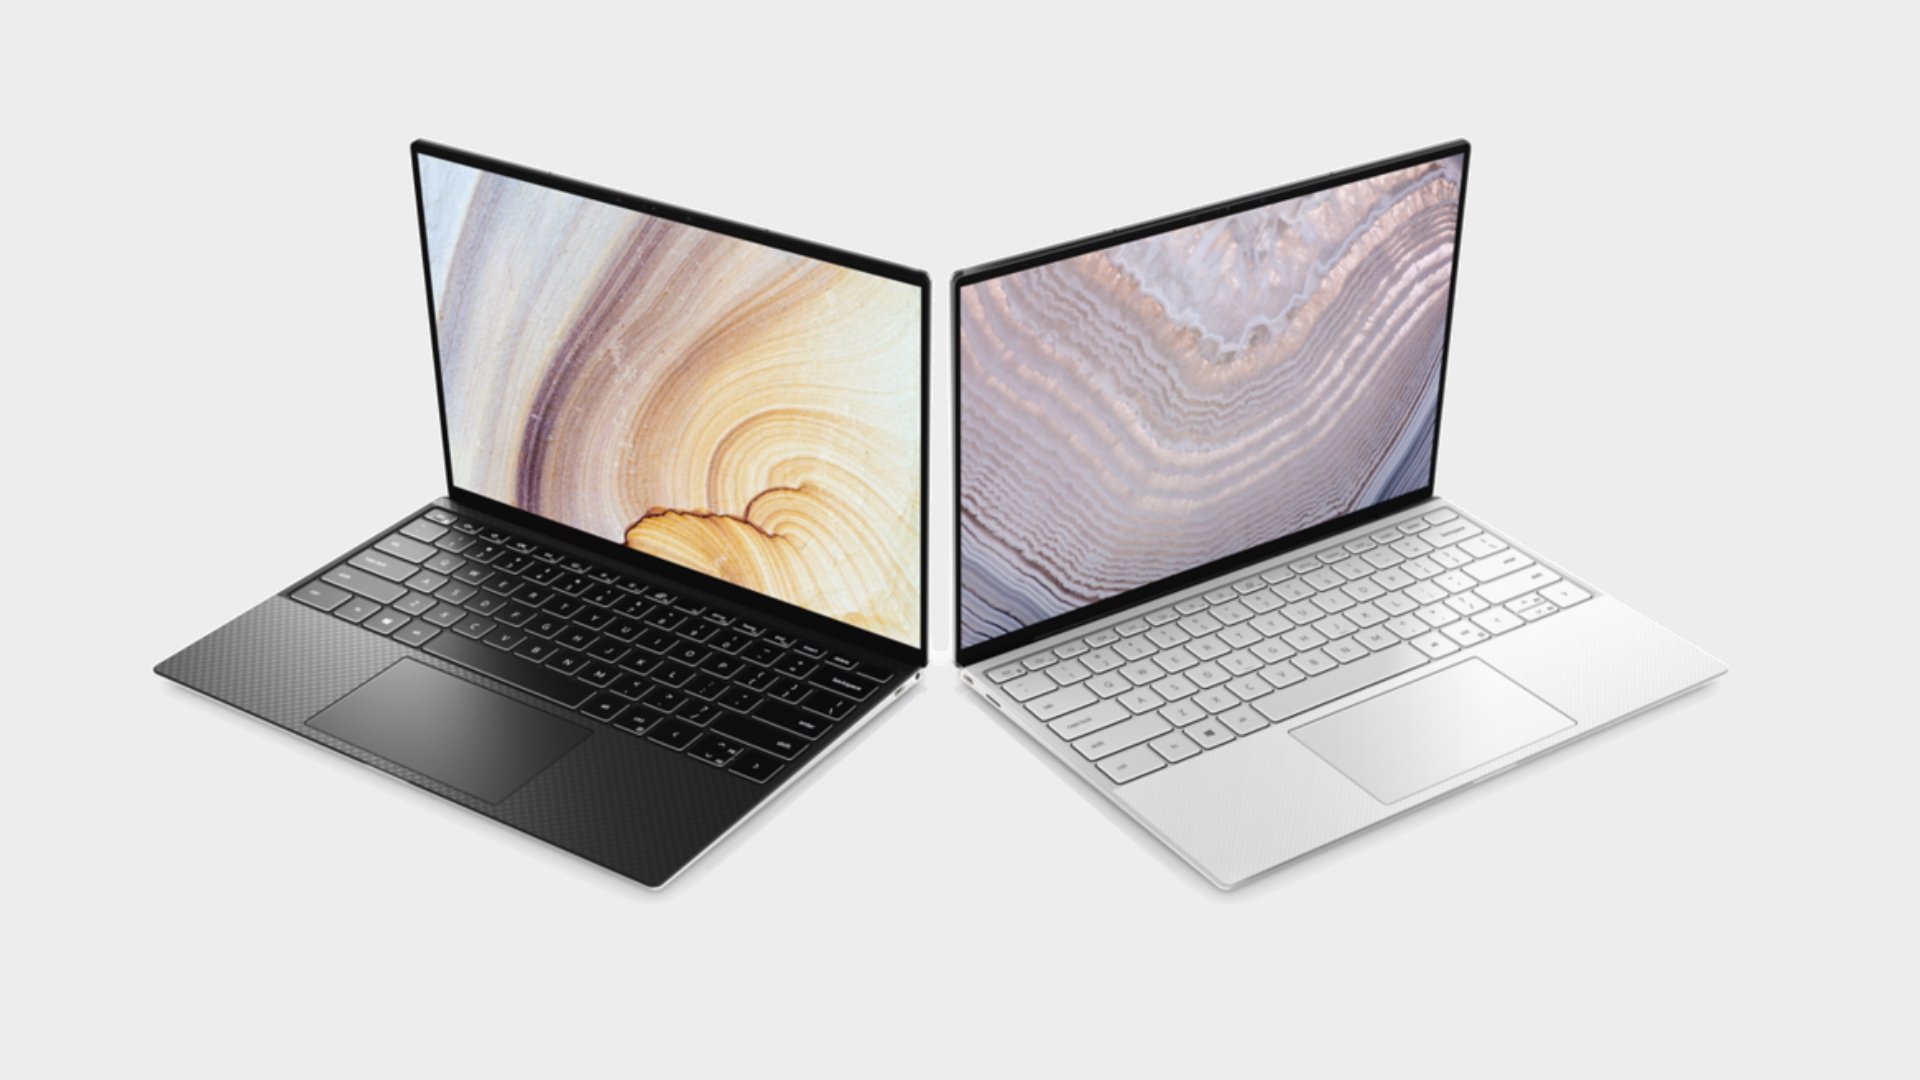  Dell is bringing Intel Xe graphics to its brand new thin-and-light XPS 13 laptops 